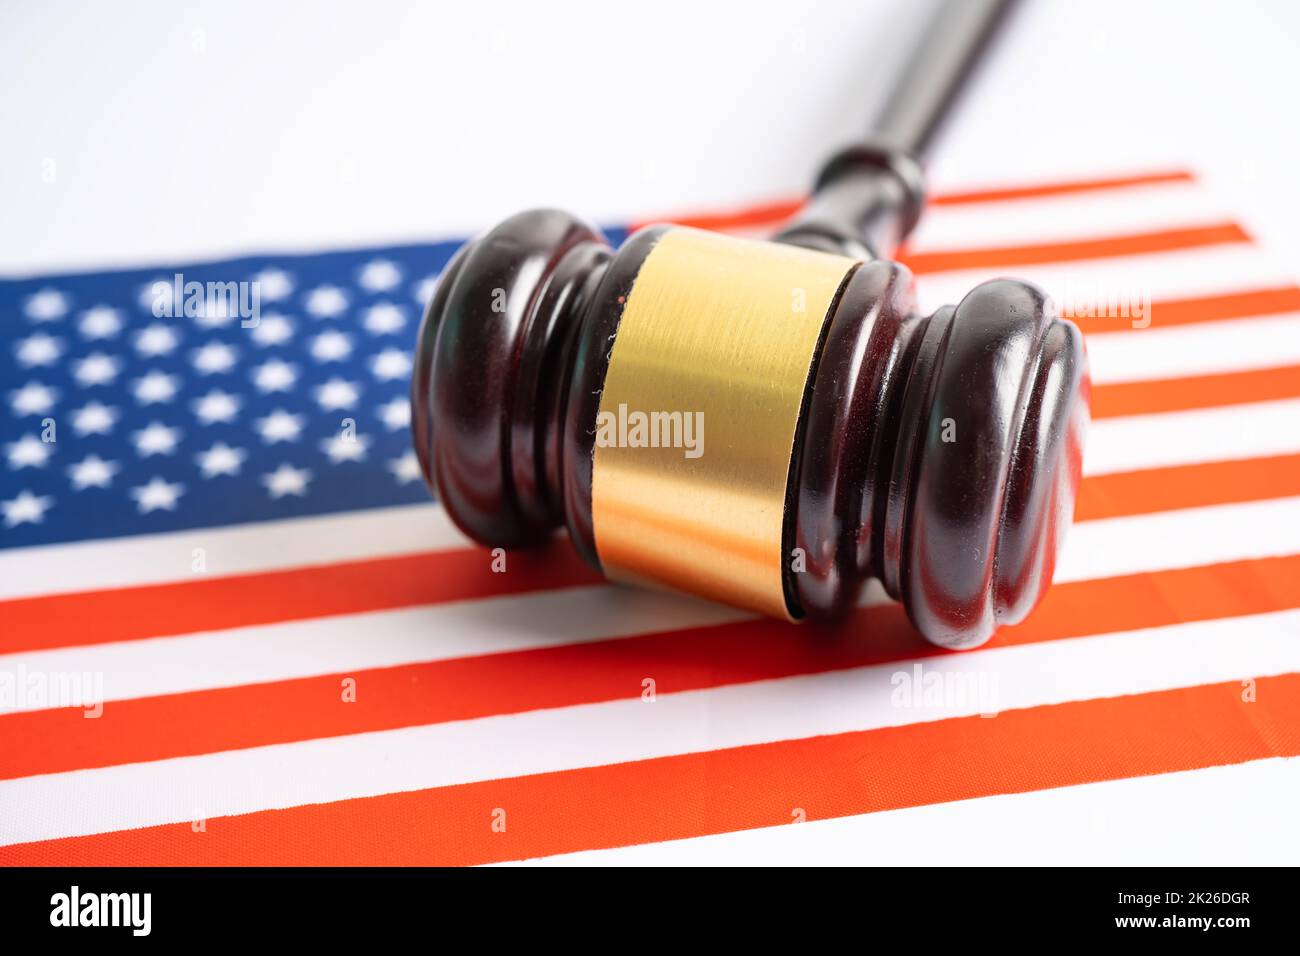 USA America flag with gavel for judge lawyer. Law and justice court concept. Stock Photo